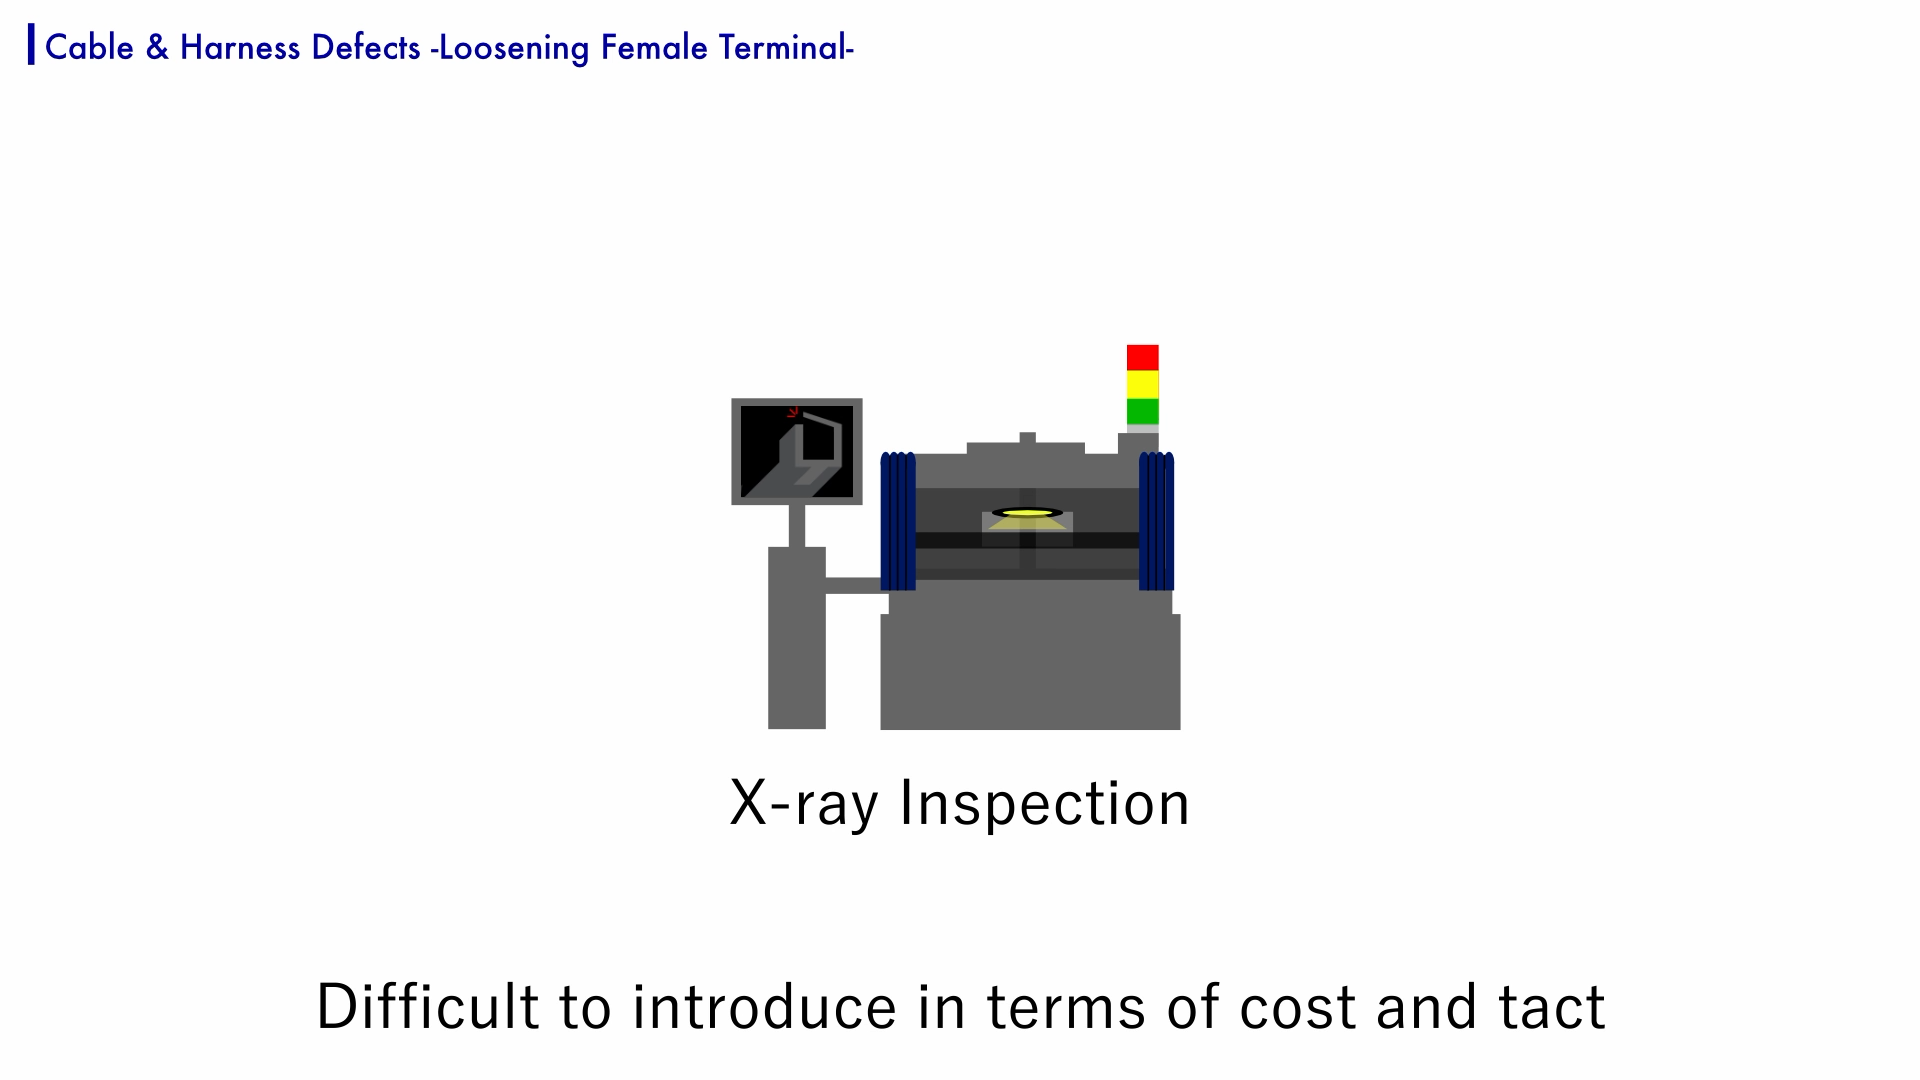 It is not easy to introduce X-ray testing into mass harness cable production